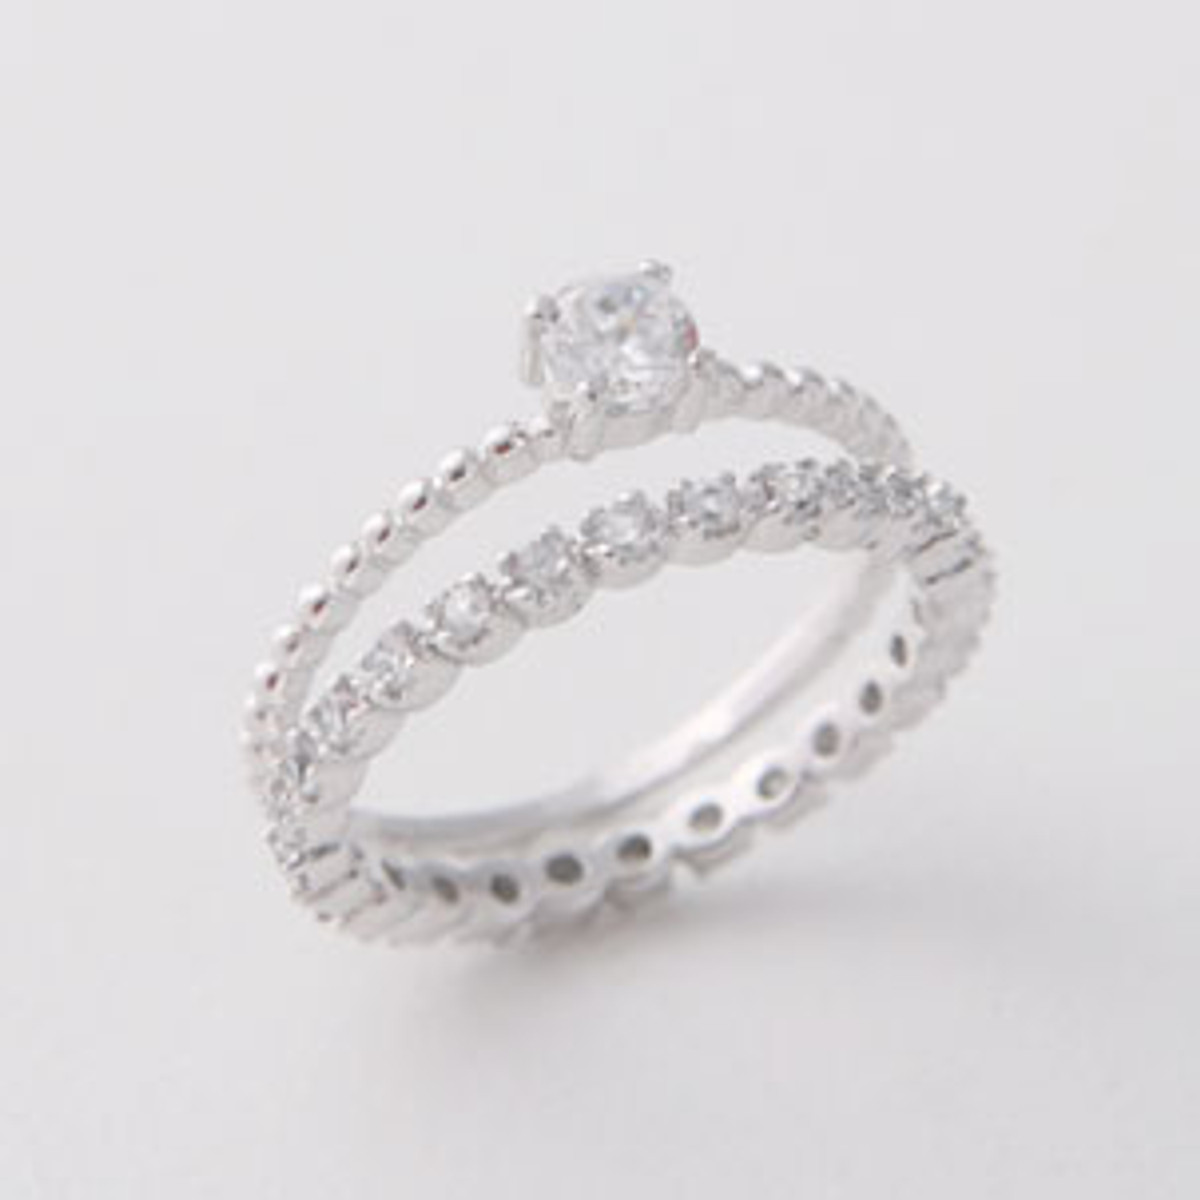 TwoBirch Sterling Silver Channel Set Round Eternity Band with Milgrained Edges Set with CZ 0.93 ct. twt. 